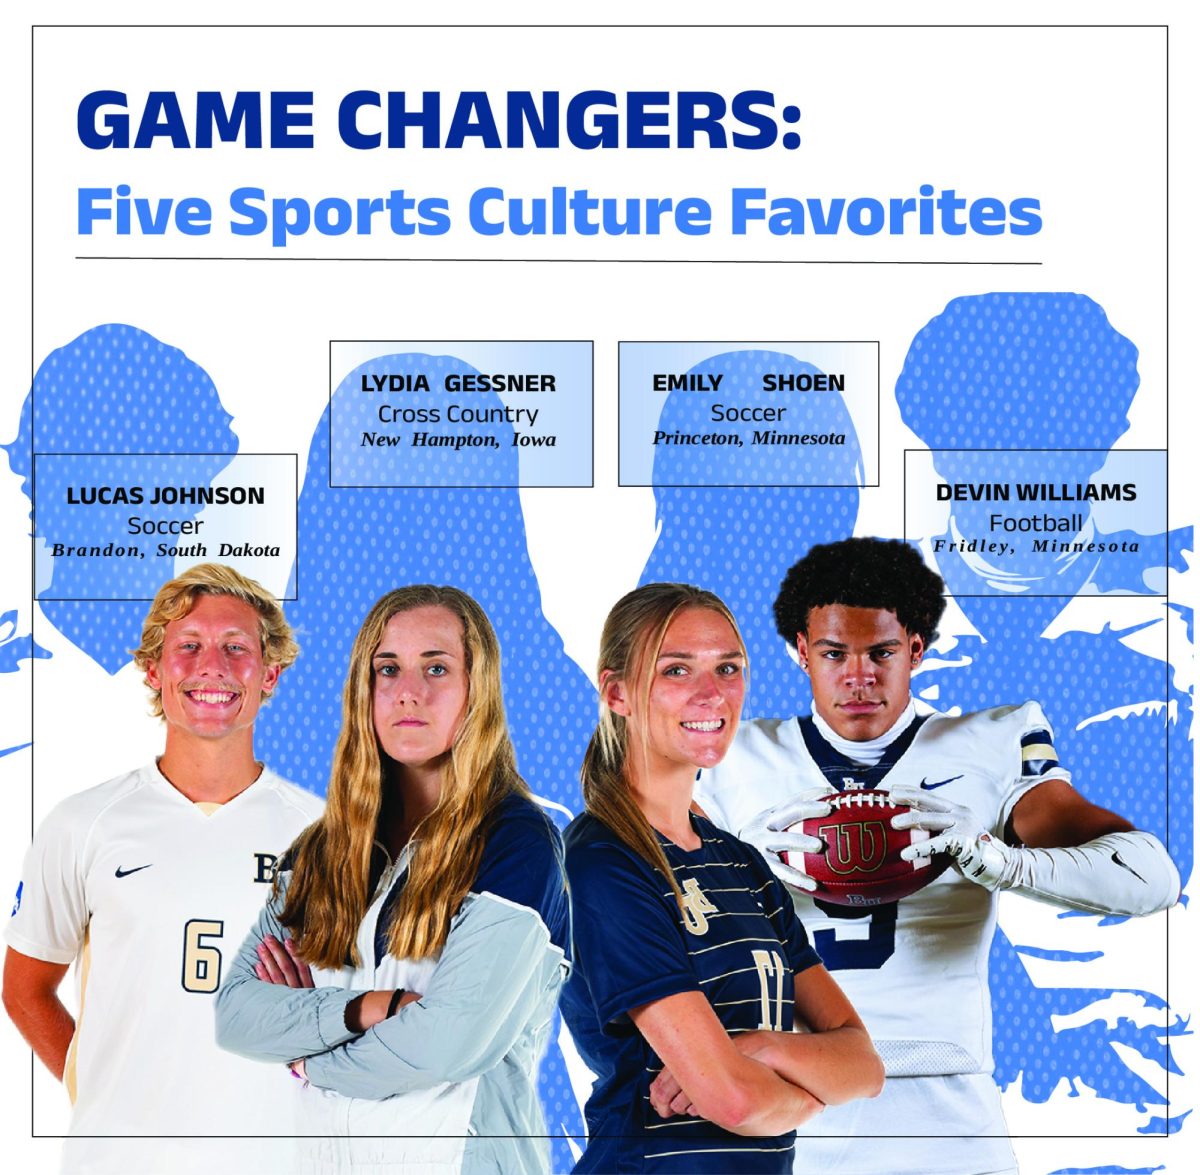 Game changers: Five sports culture favorites